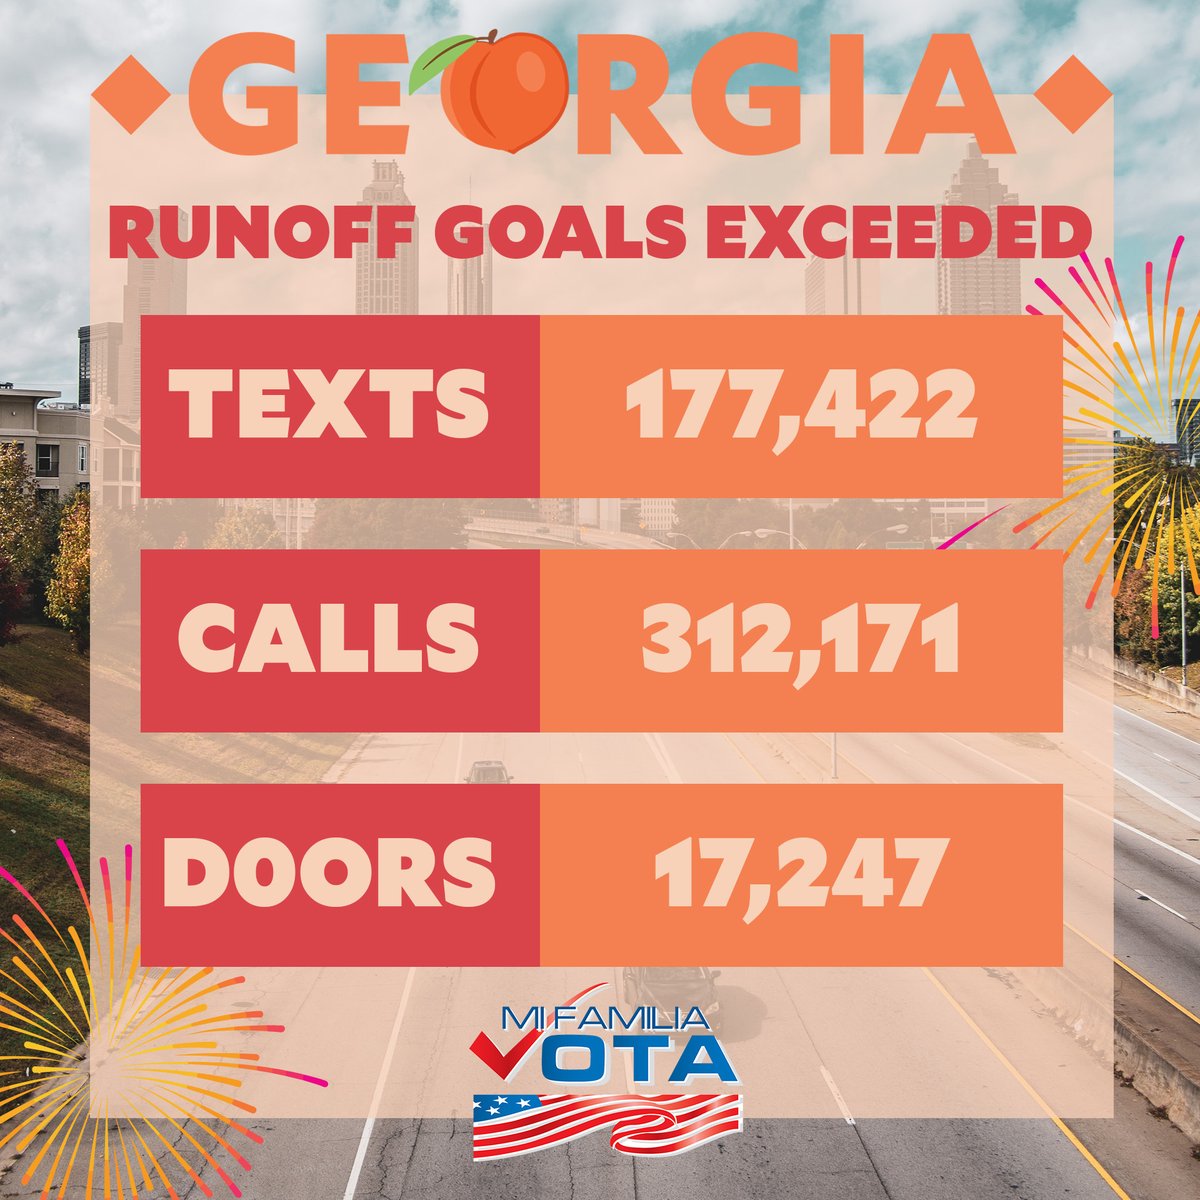 🍑 ¡Felicidades, #Georgia! On the ground is where our speciality is because YOU, our communities, are what matter most. You came out and showed what Latino priorities are. We look forward to knocking on your door, texting and calling to continue creating Latino political power.